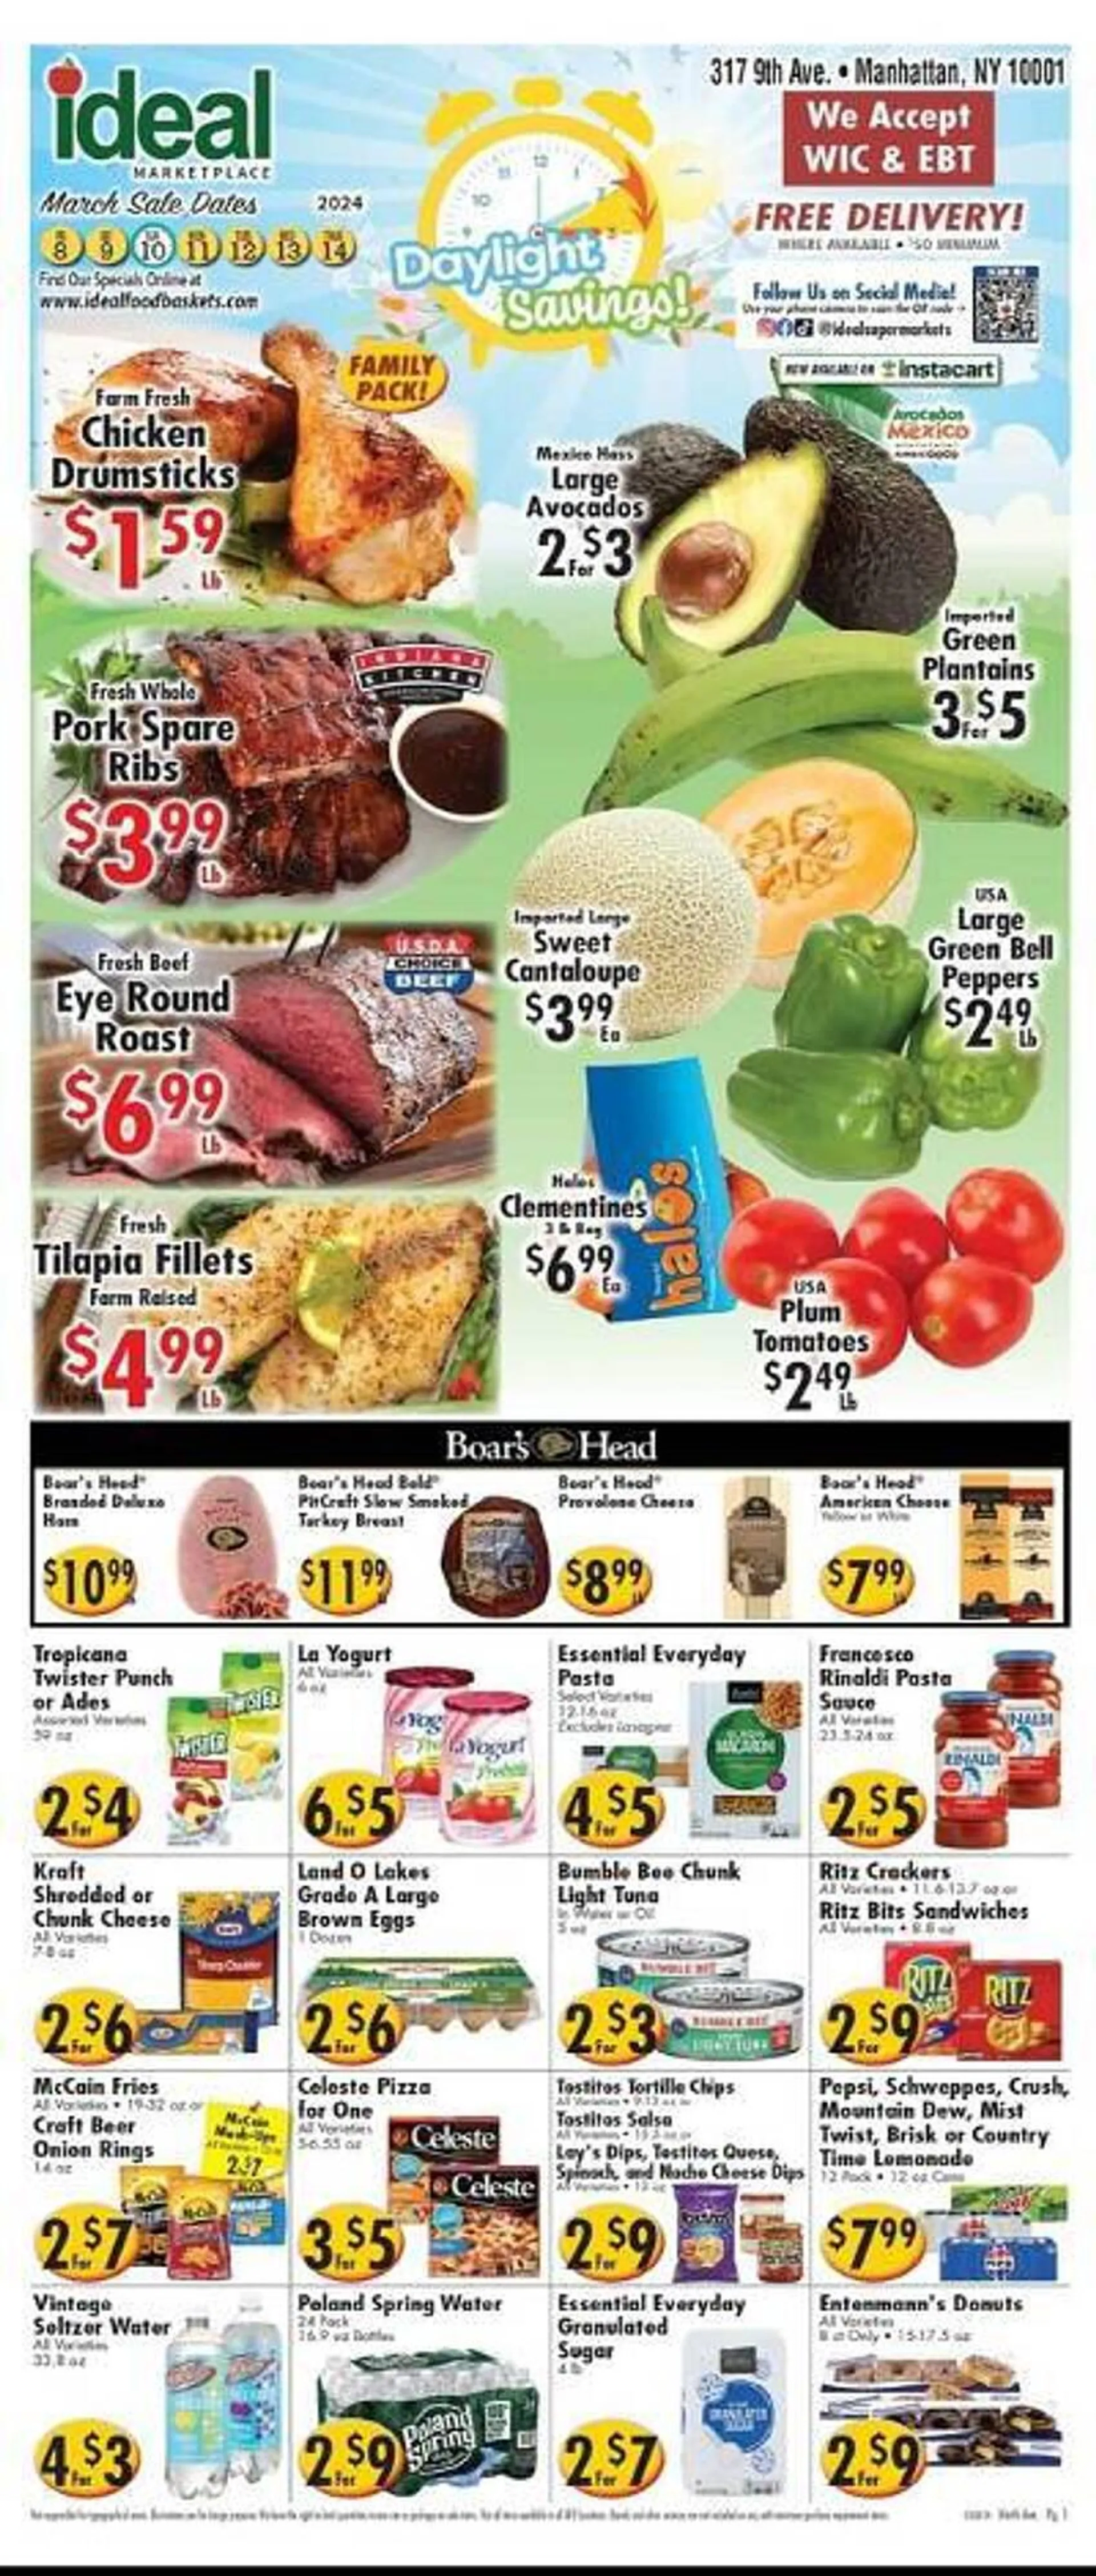 Weekly ad Ideal Food Basket Weekly Ad from March 8 to March 14 2024 - Page 1